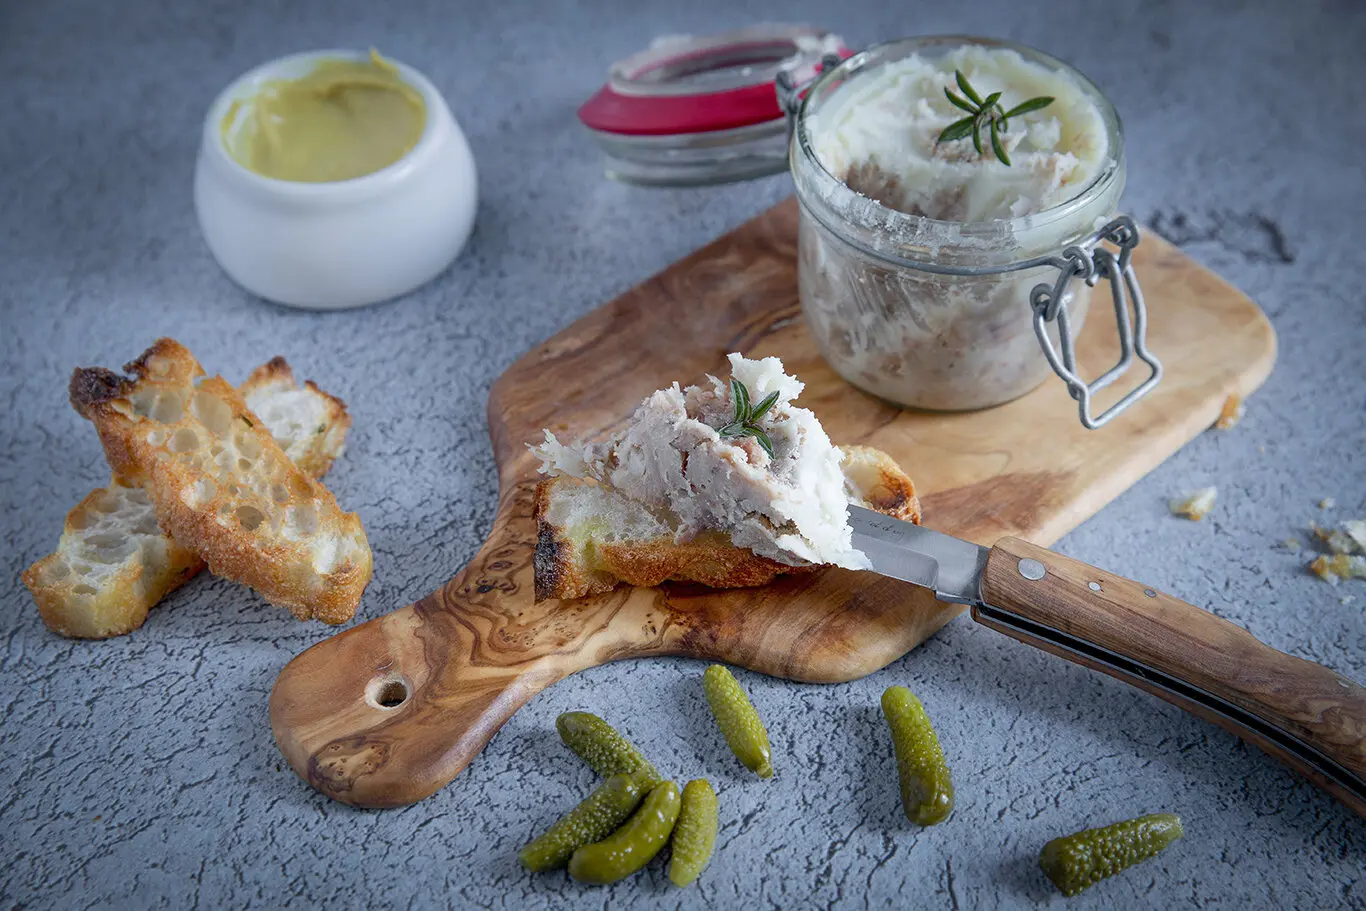 smoked pork rillettes - What are rillettes used for